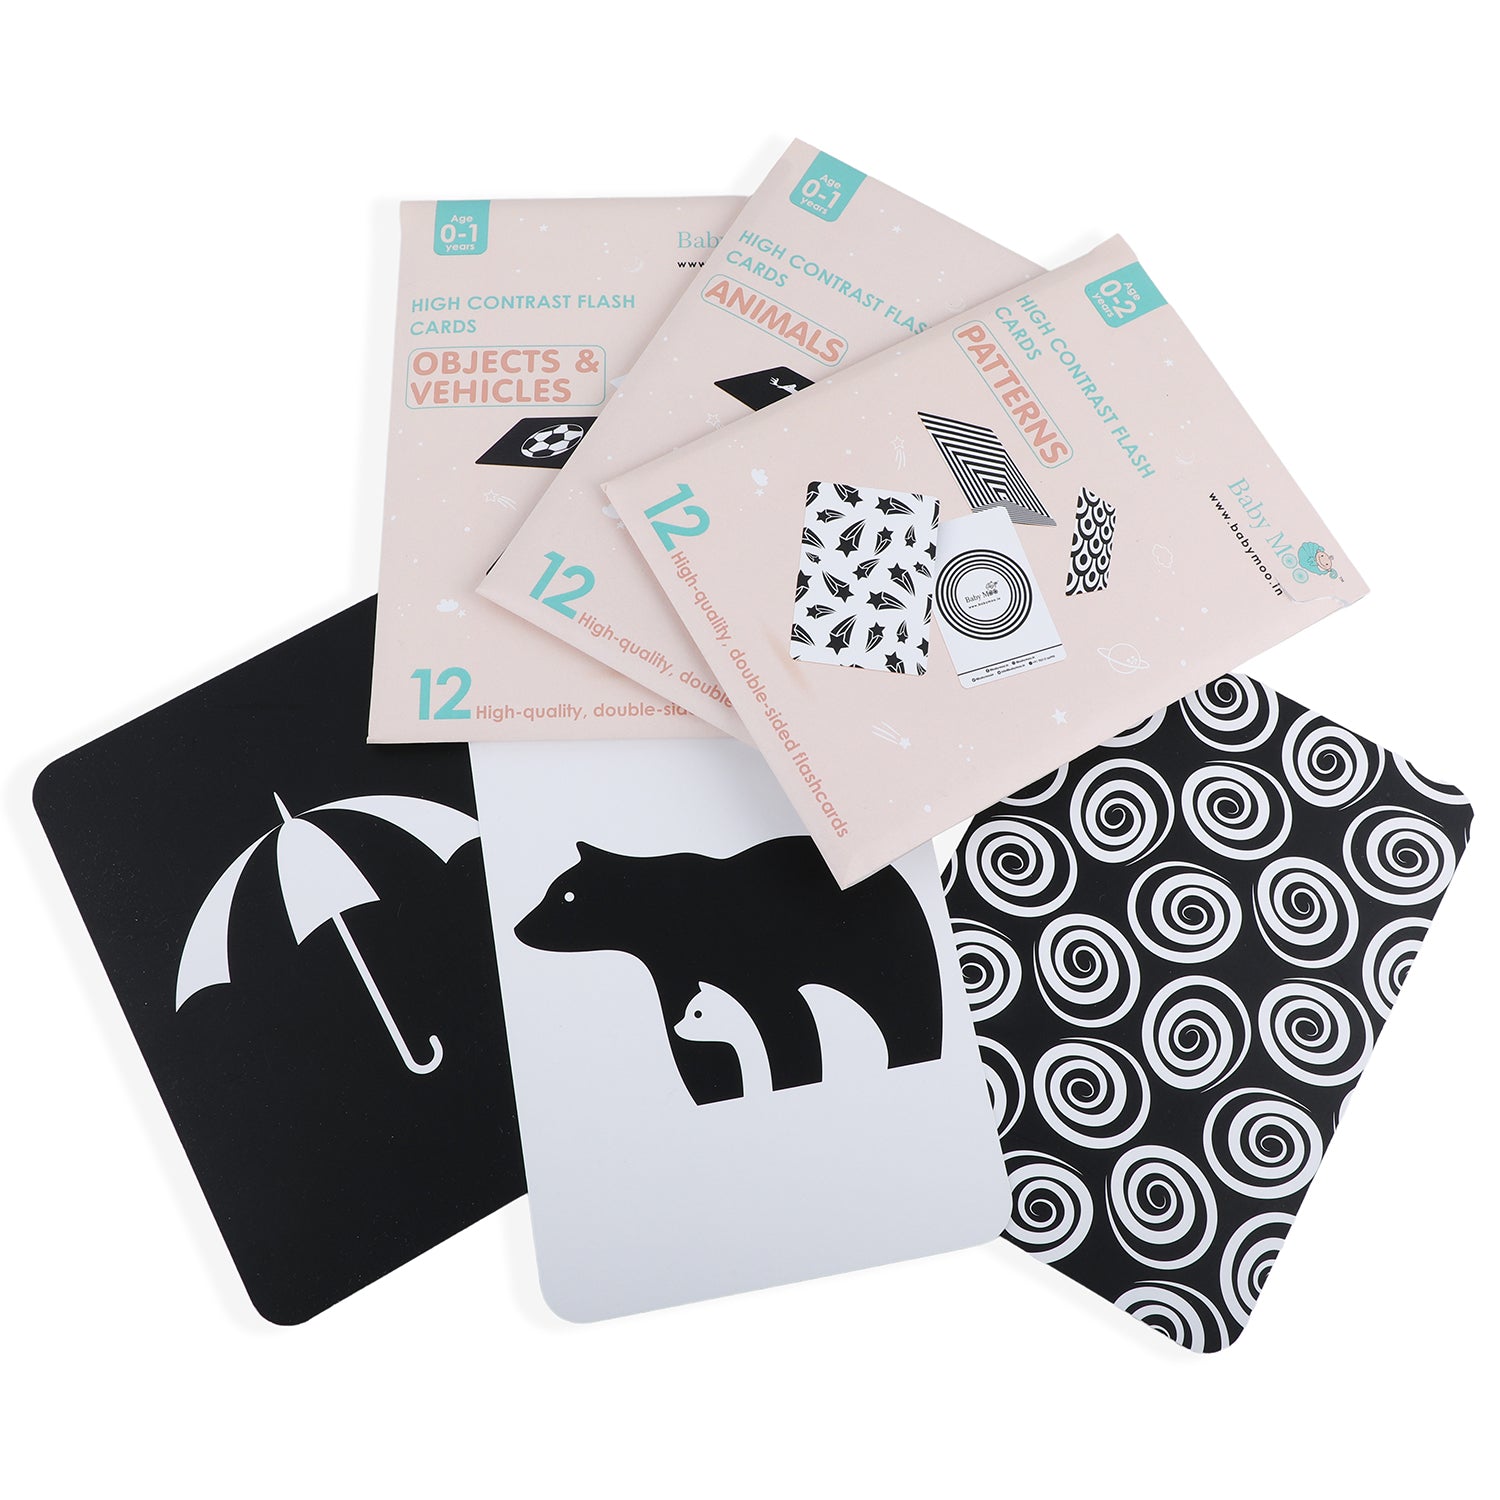 High Contrast Flash Cards 36 Cards - Bundle of Animals And Objects And Vehicles And Patterns - Baby Moo